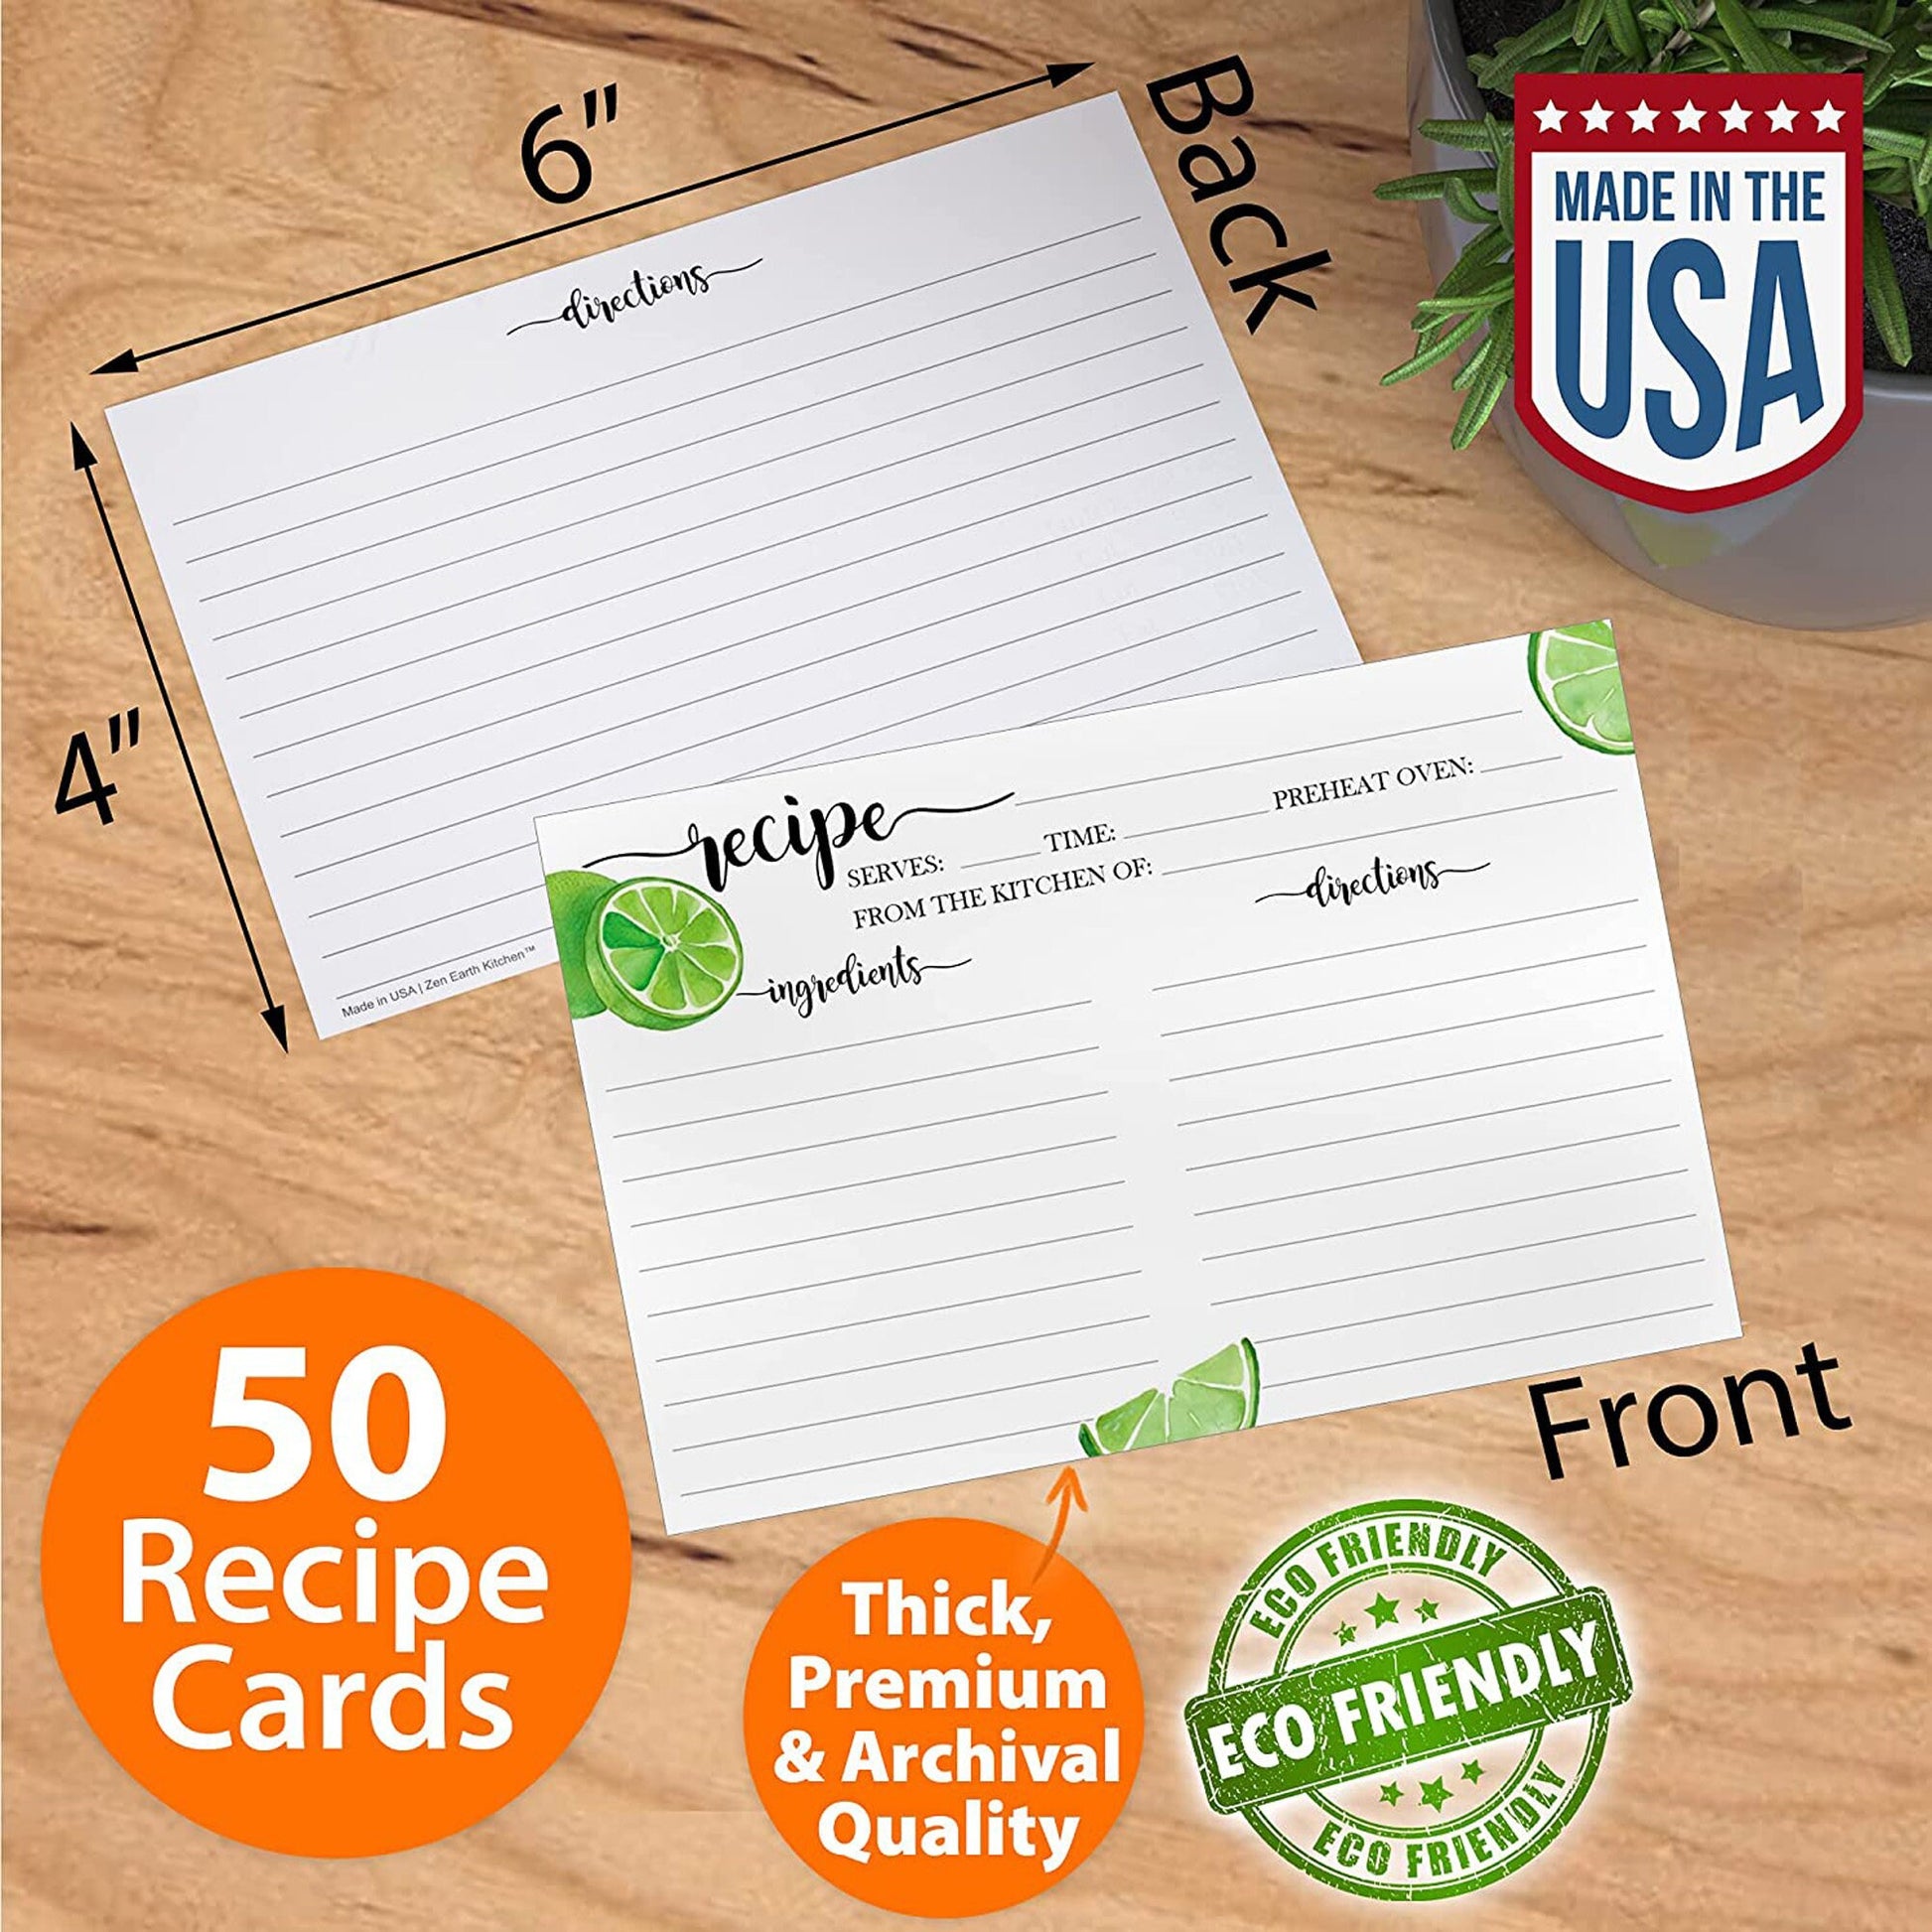 Lime Recipe Cards 4x6 Inch Cute Notecards - Matte, Non-Smudge, Thick Paper - Lined Recipe Template Index Cards - Wedding, Bridal Showers